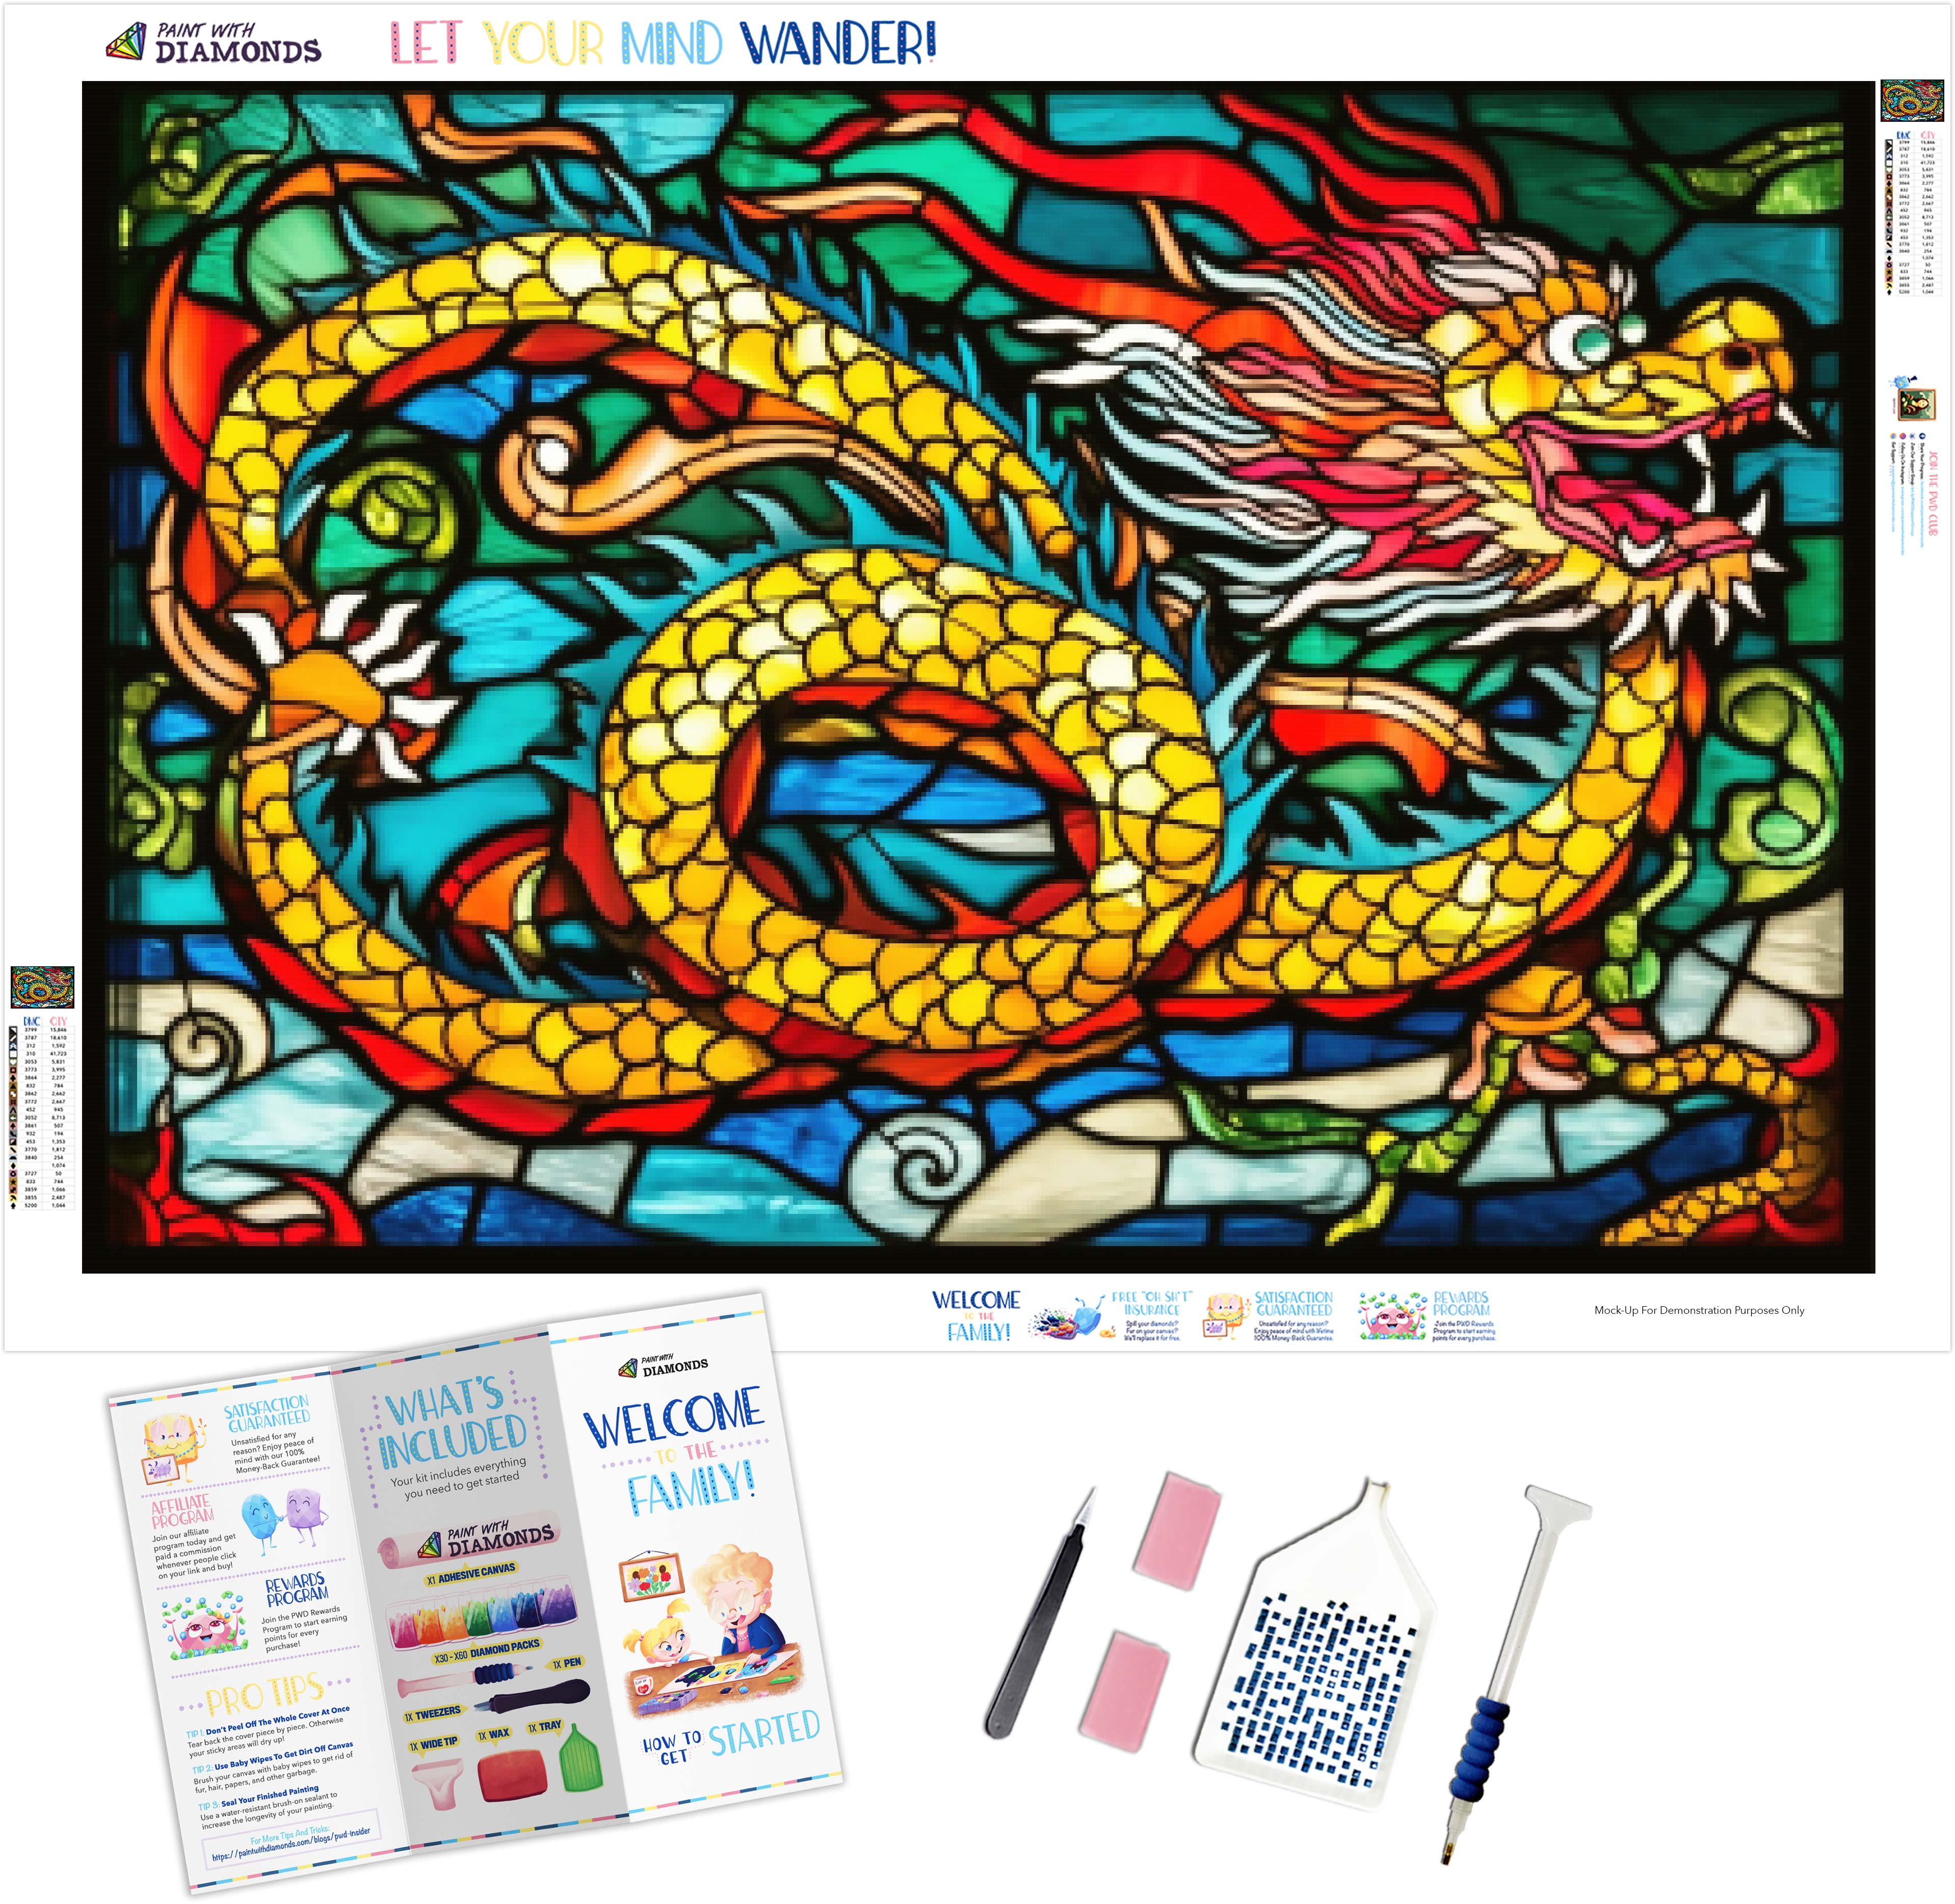 Chinese Girl And Dragon - 5D Diamond Painting 